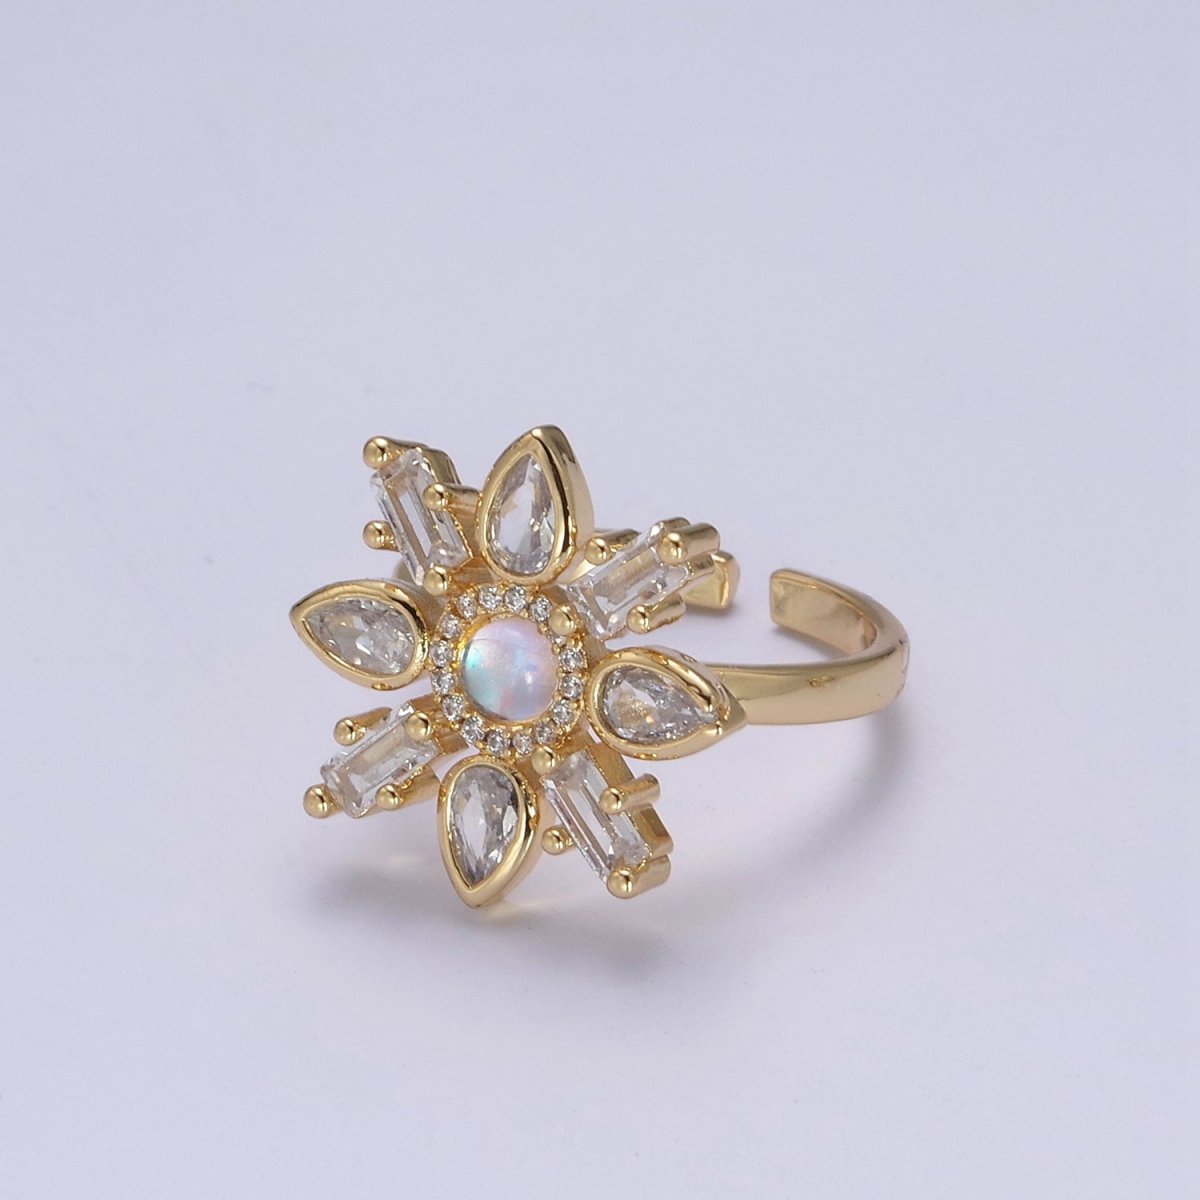 Clear & Rainbow Crystal Zirconia Flower Ring, Dainty Mother Nature 24K Gold Filled Adjustable Statement Ring | U-457 U-458 - DLUXCA